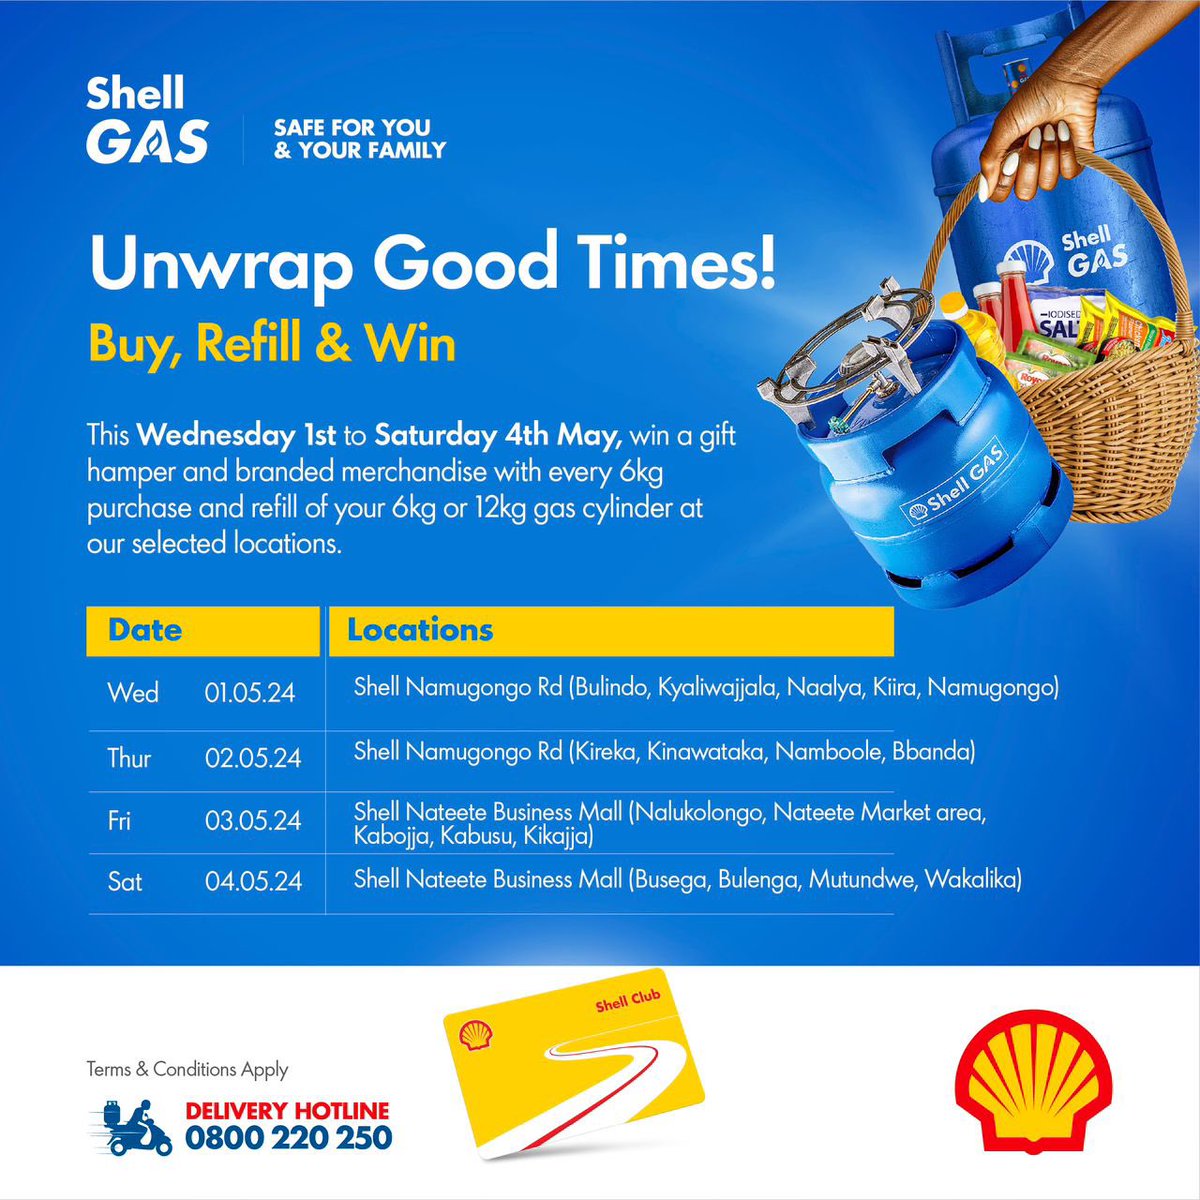 Bulindo people you can refill your Shell Gas cylinders at discounted prices and also get gift hampers plus branded merchandise from @Shell_Uganda Pass by Shell Namugongo for the great deals offered on all Shell Gas cylinders #ShellGasBuyRefillWin